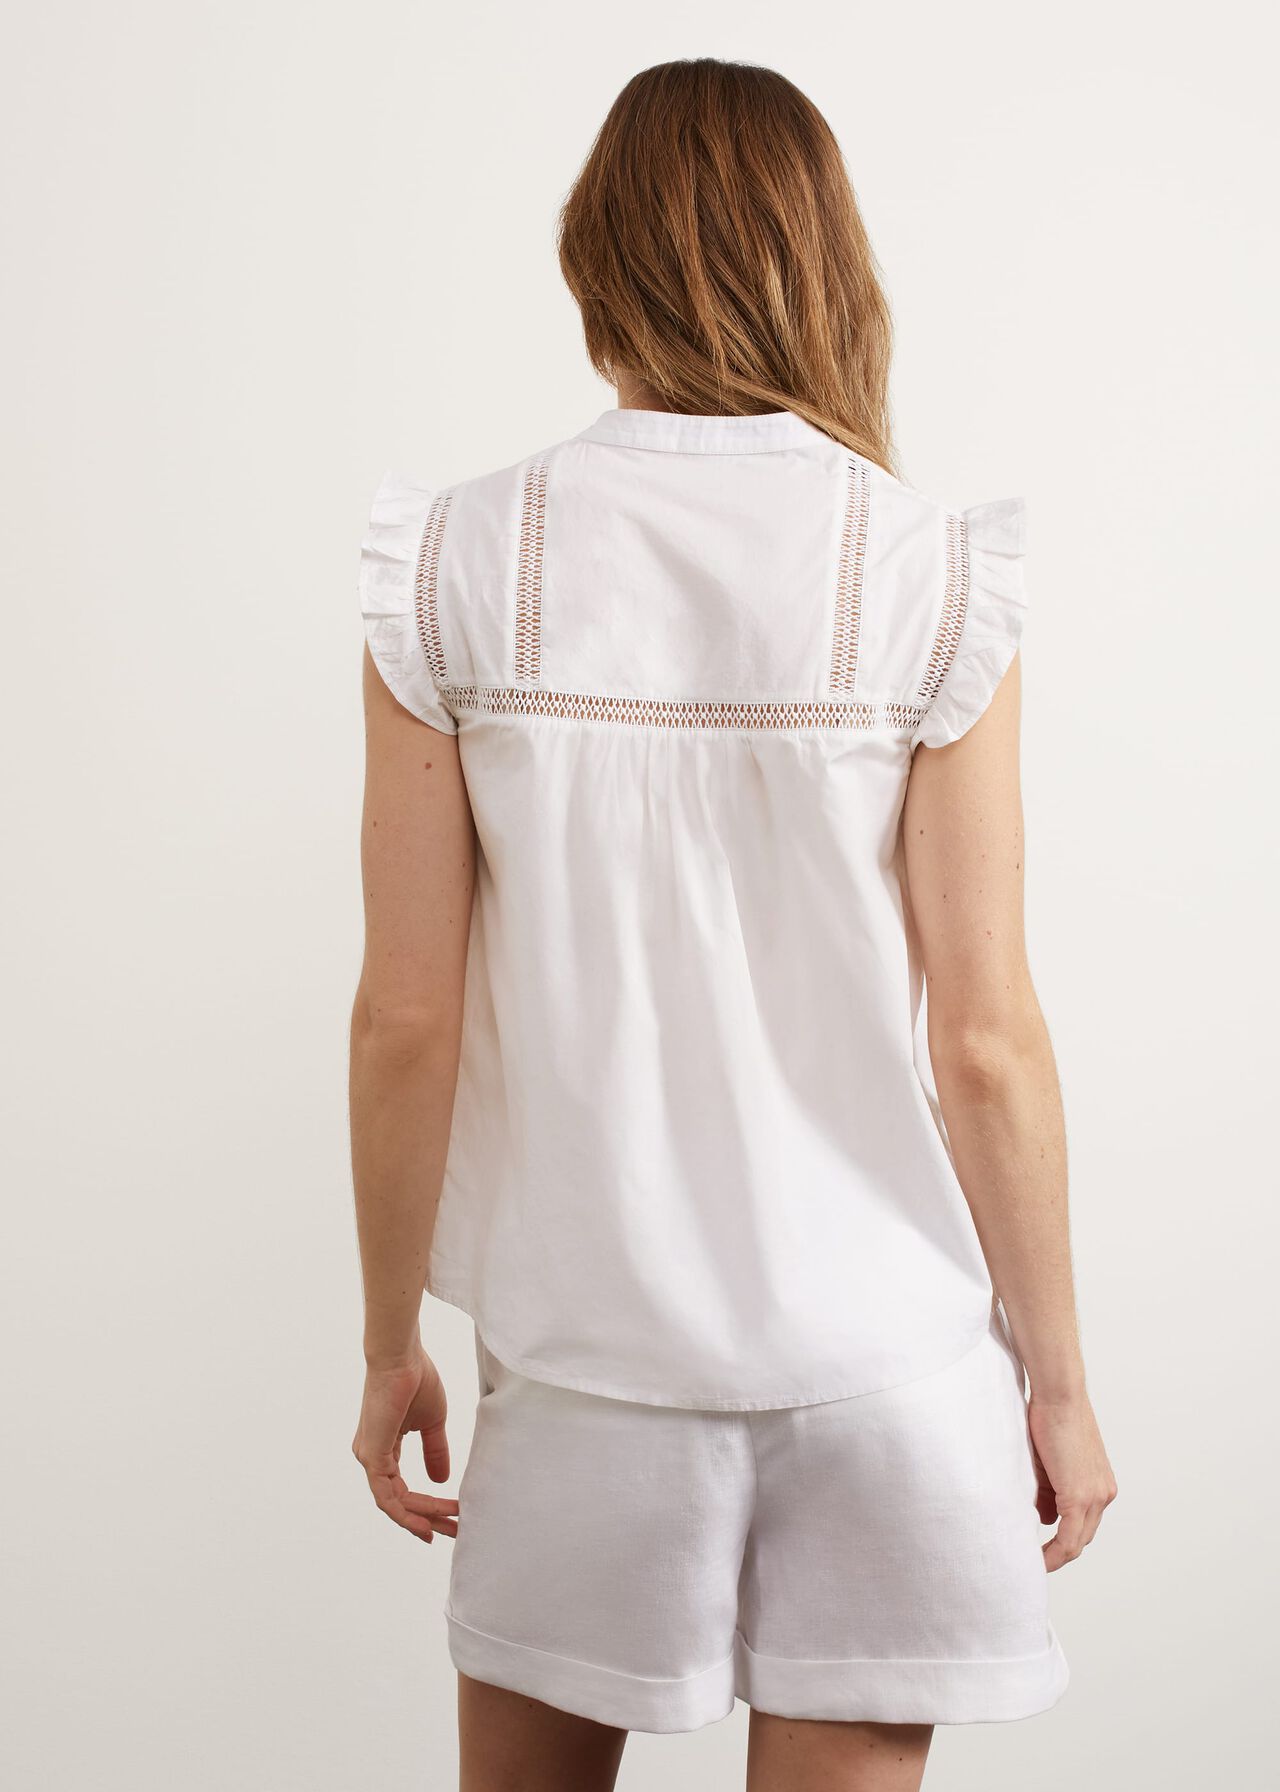 Sywell Blouse, White, hi-res